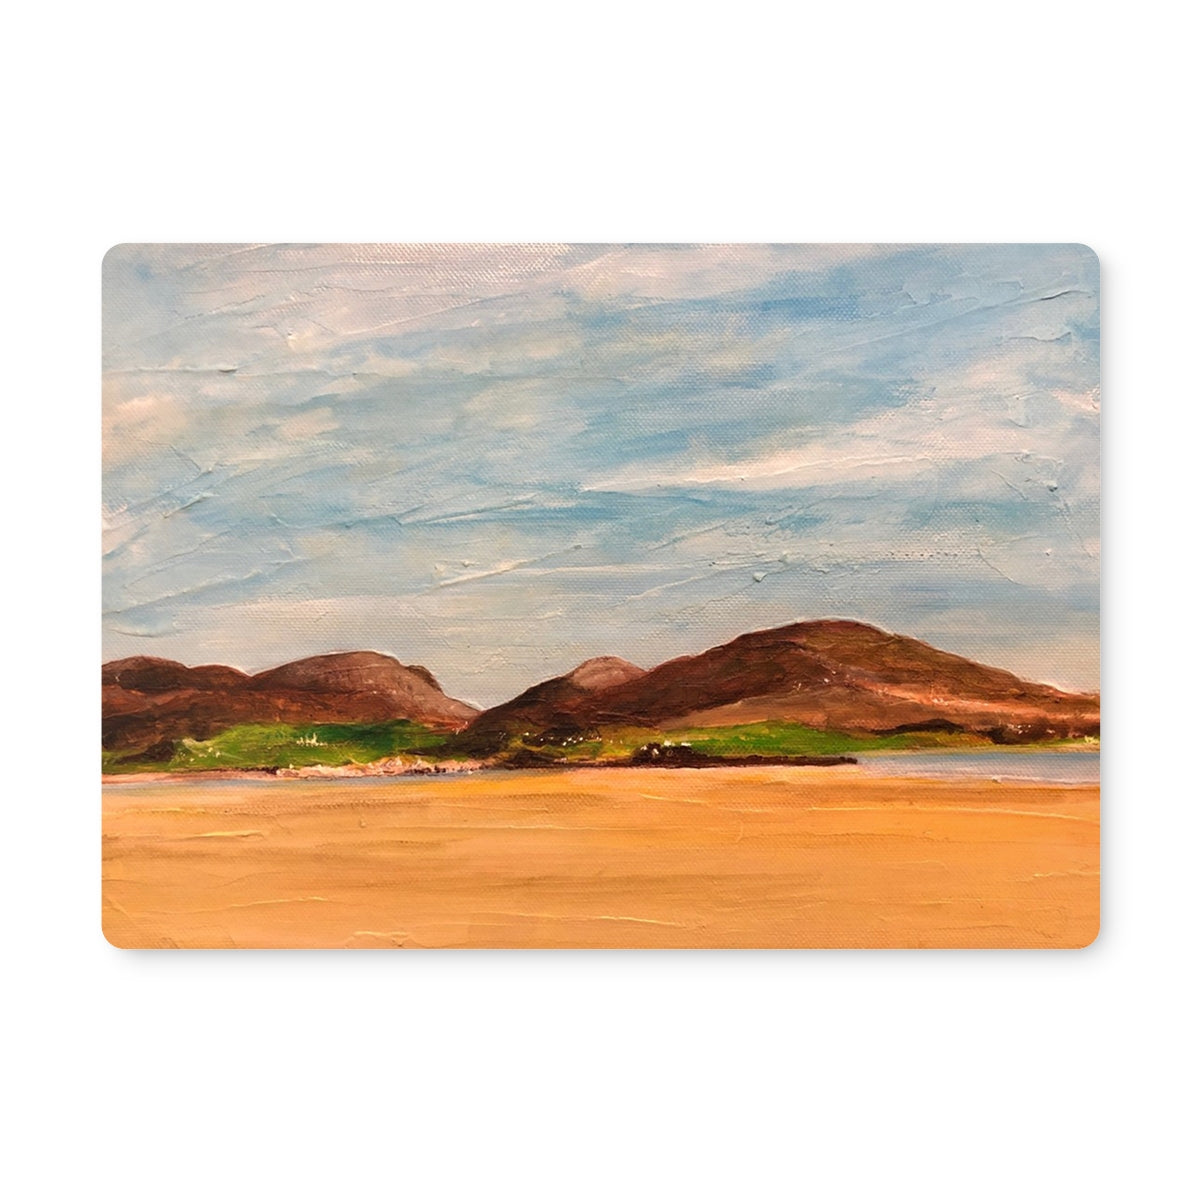 Uig Sands Lewis Art Gifts Placemat-Placemats-Hebridean Islands Art Gallery-6 Placemats-Paintings, Prints, Homeware, Art Gifts From Scotland By Scottish Artist Kevin Hunter